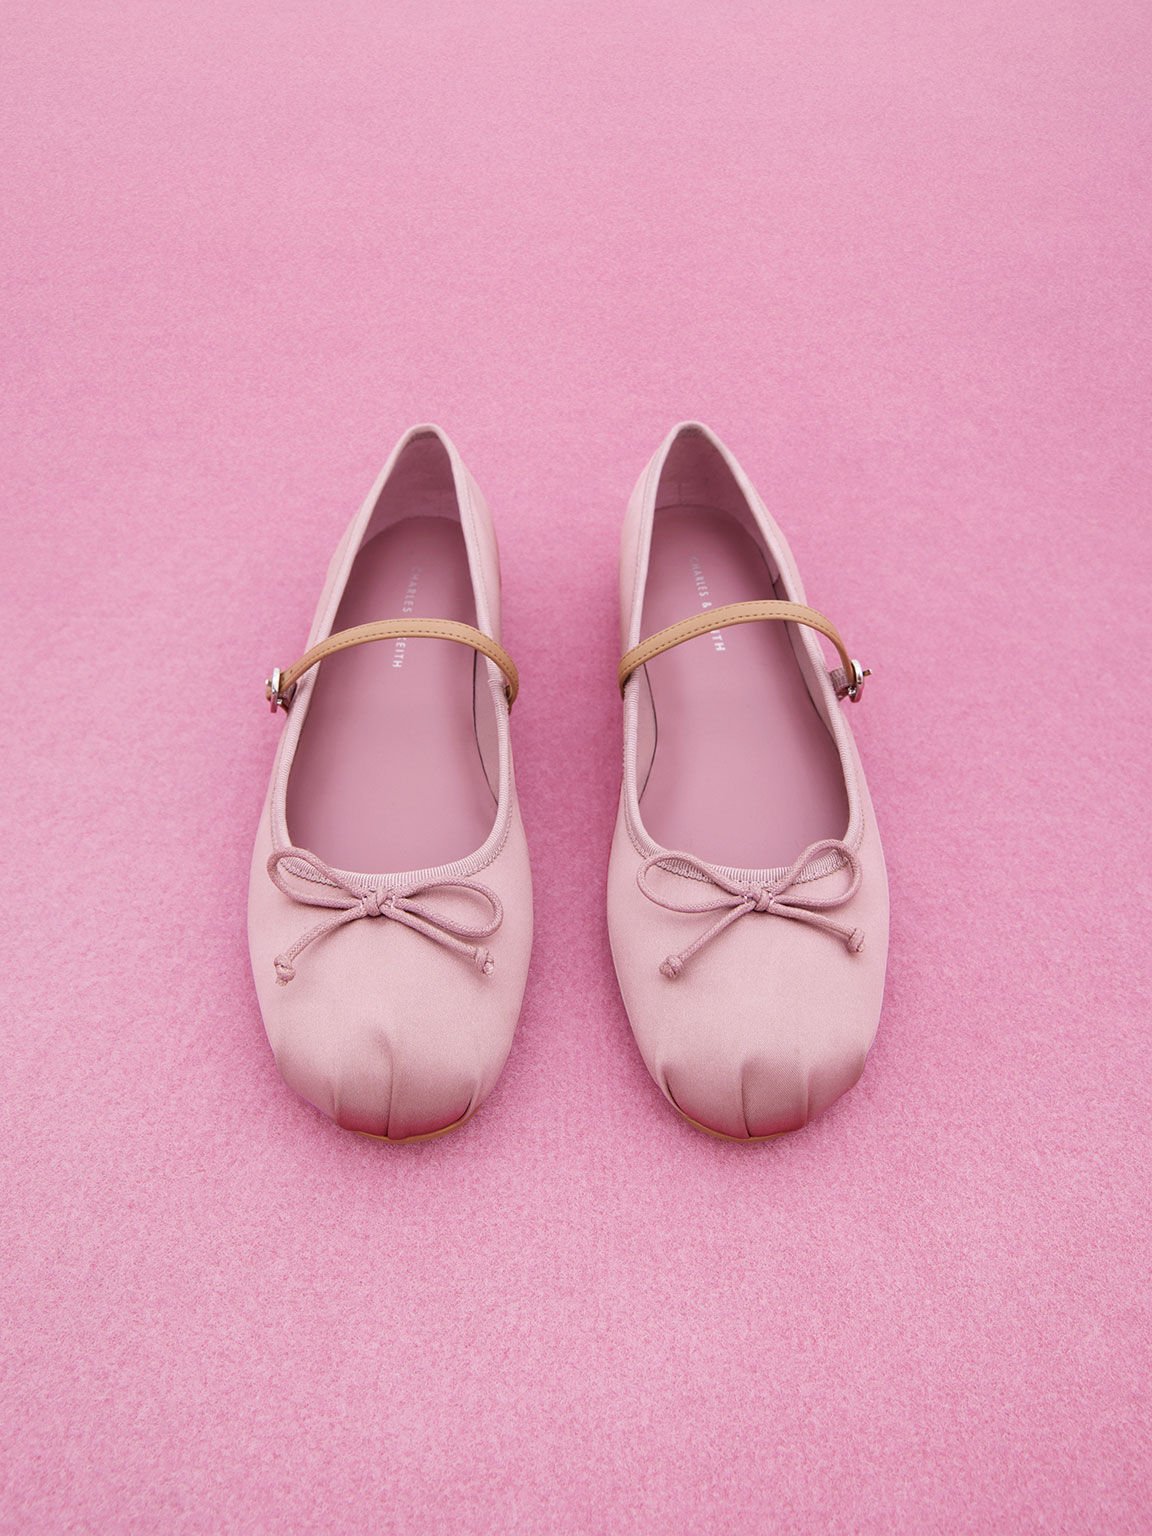 Women’s satin bow Mary Jane flats in pink - CHARLES & KEITH